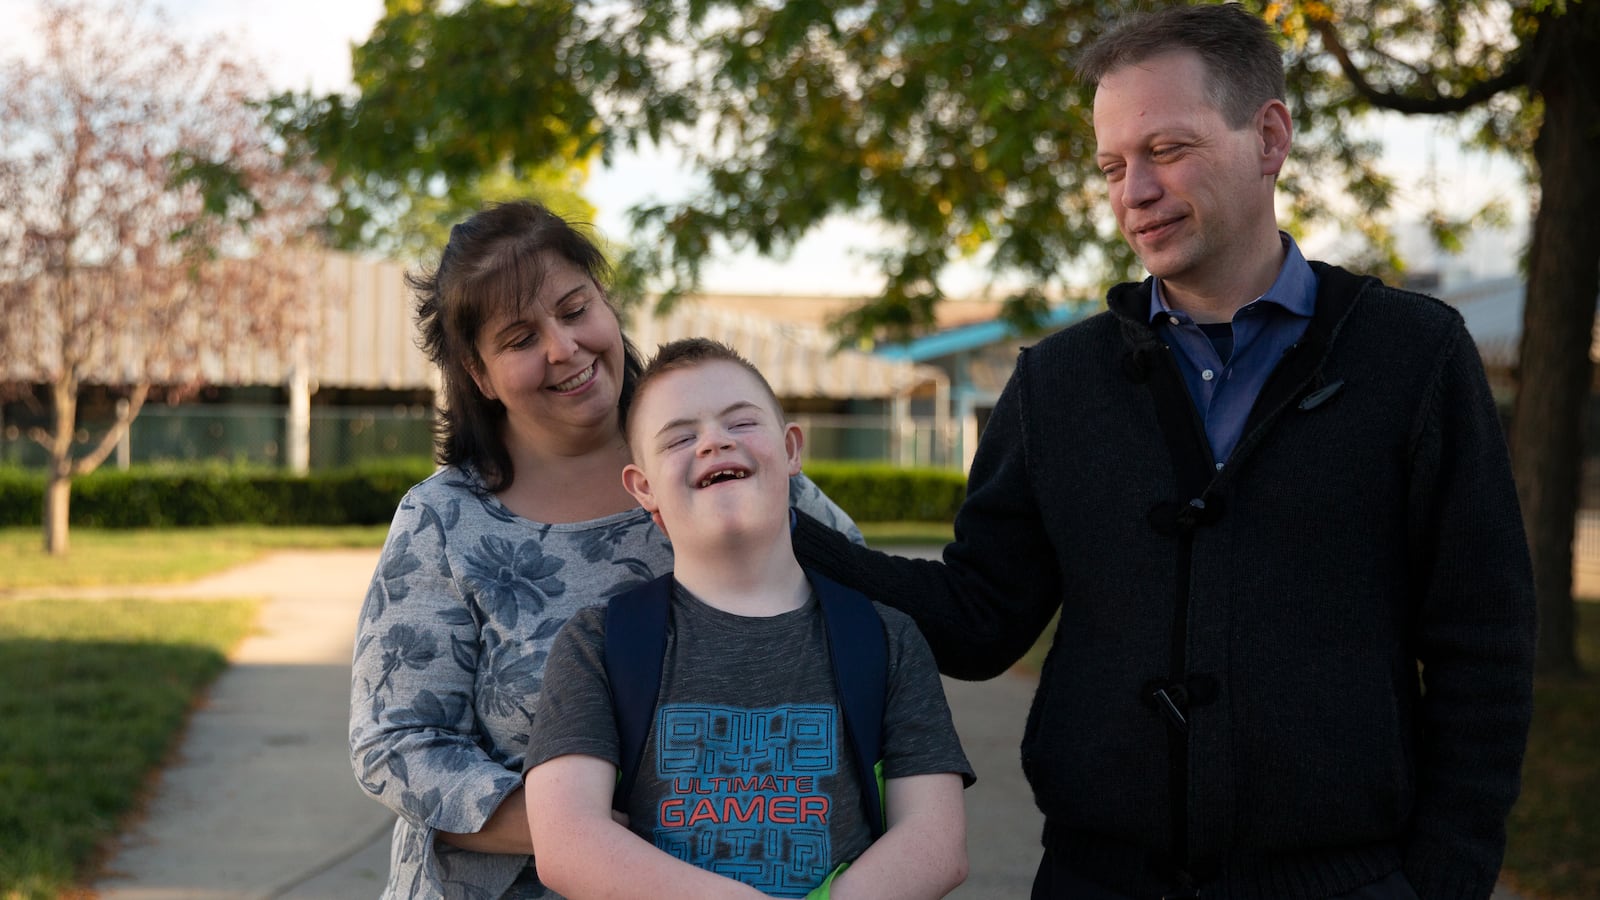 Anne and Jason Kanable said their son Dane, who has Down syndrome, was lost for an entire school day after the wrong bus driver mistakenly picked him up, Oct. 15, 2019.